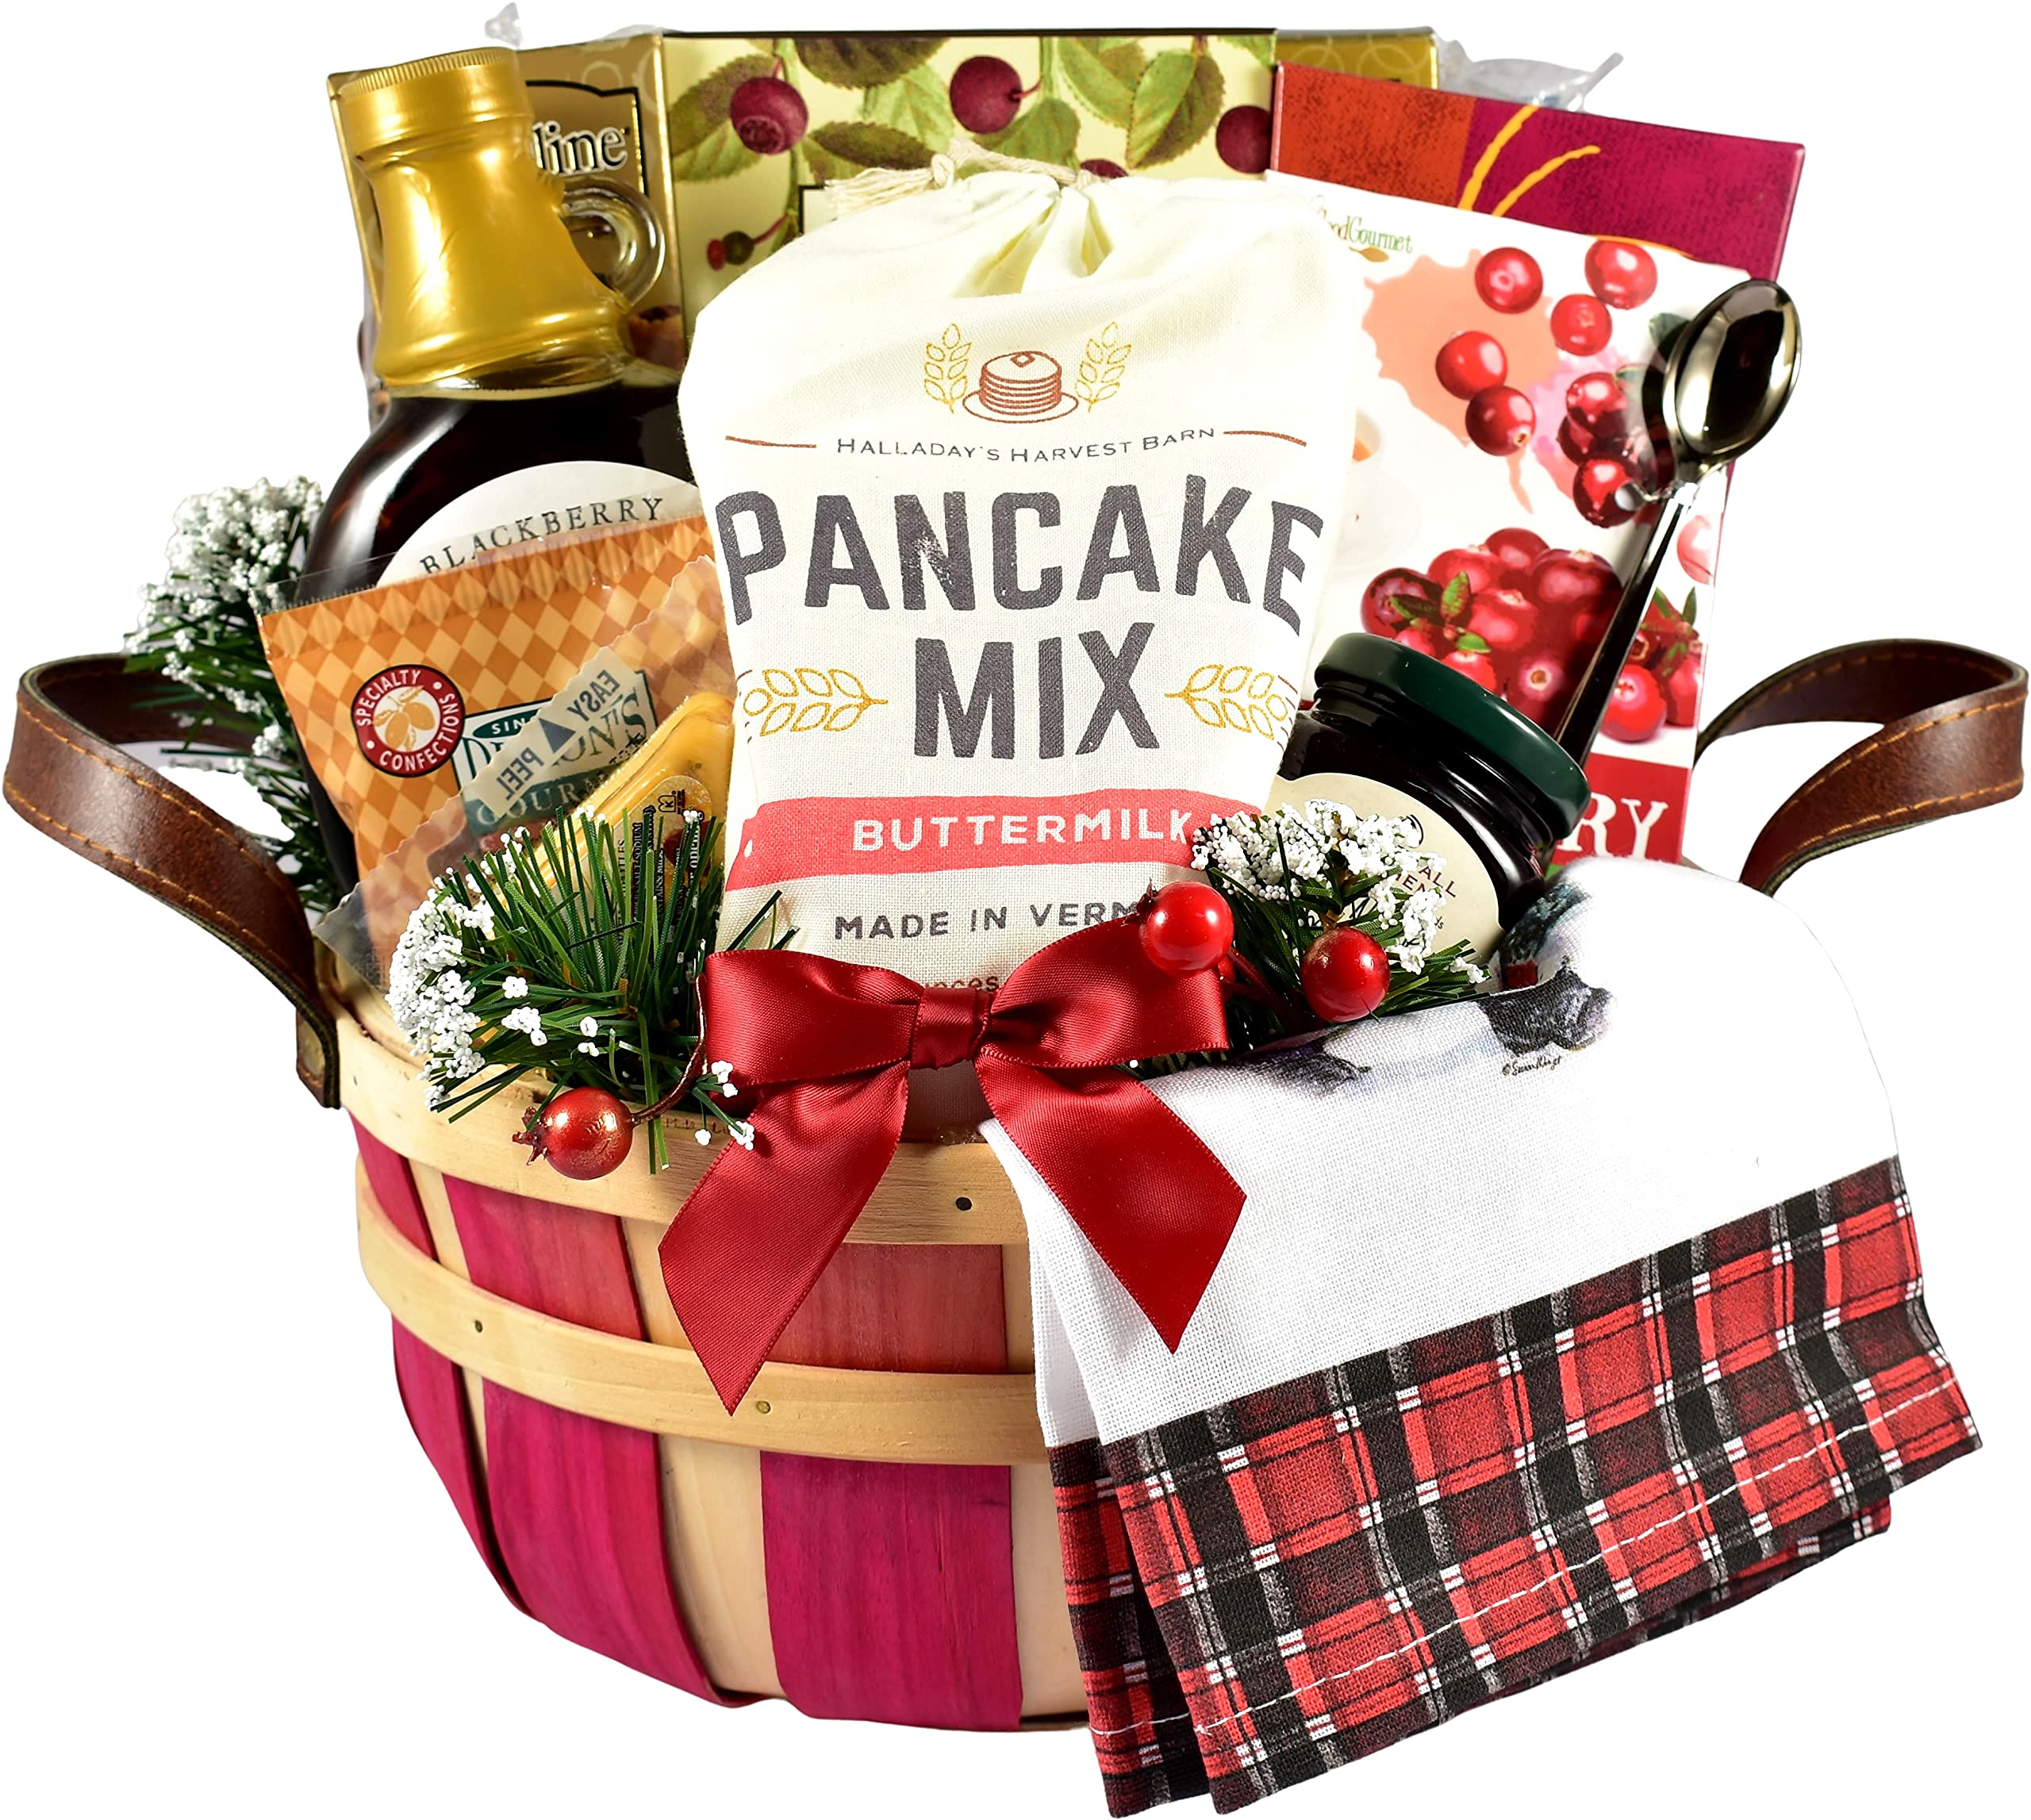 Country Christmas Breakfast Basket - A Classic Morning Breakfast Kit Filled with Mouth Watering Flavors for Family or Friends (Large)